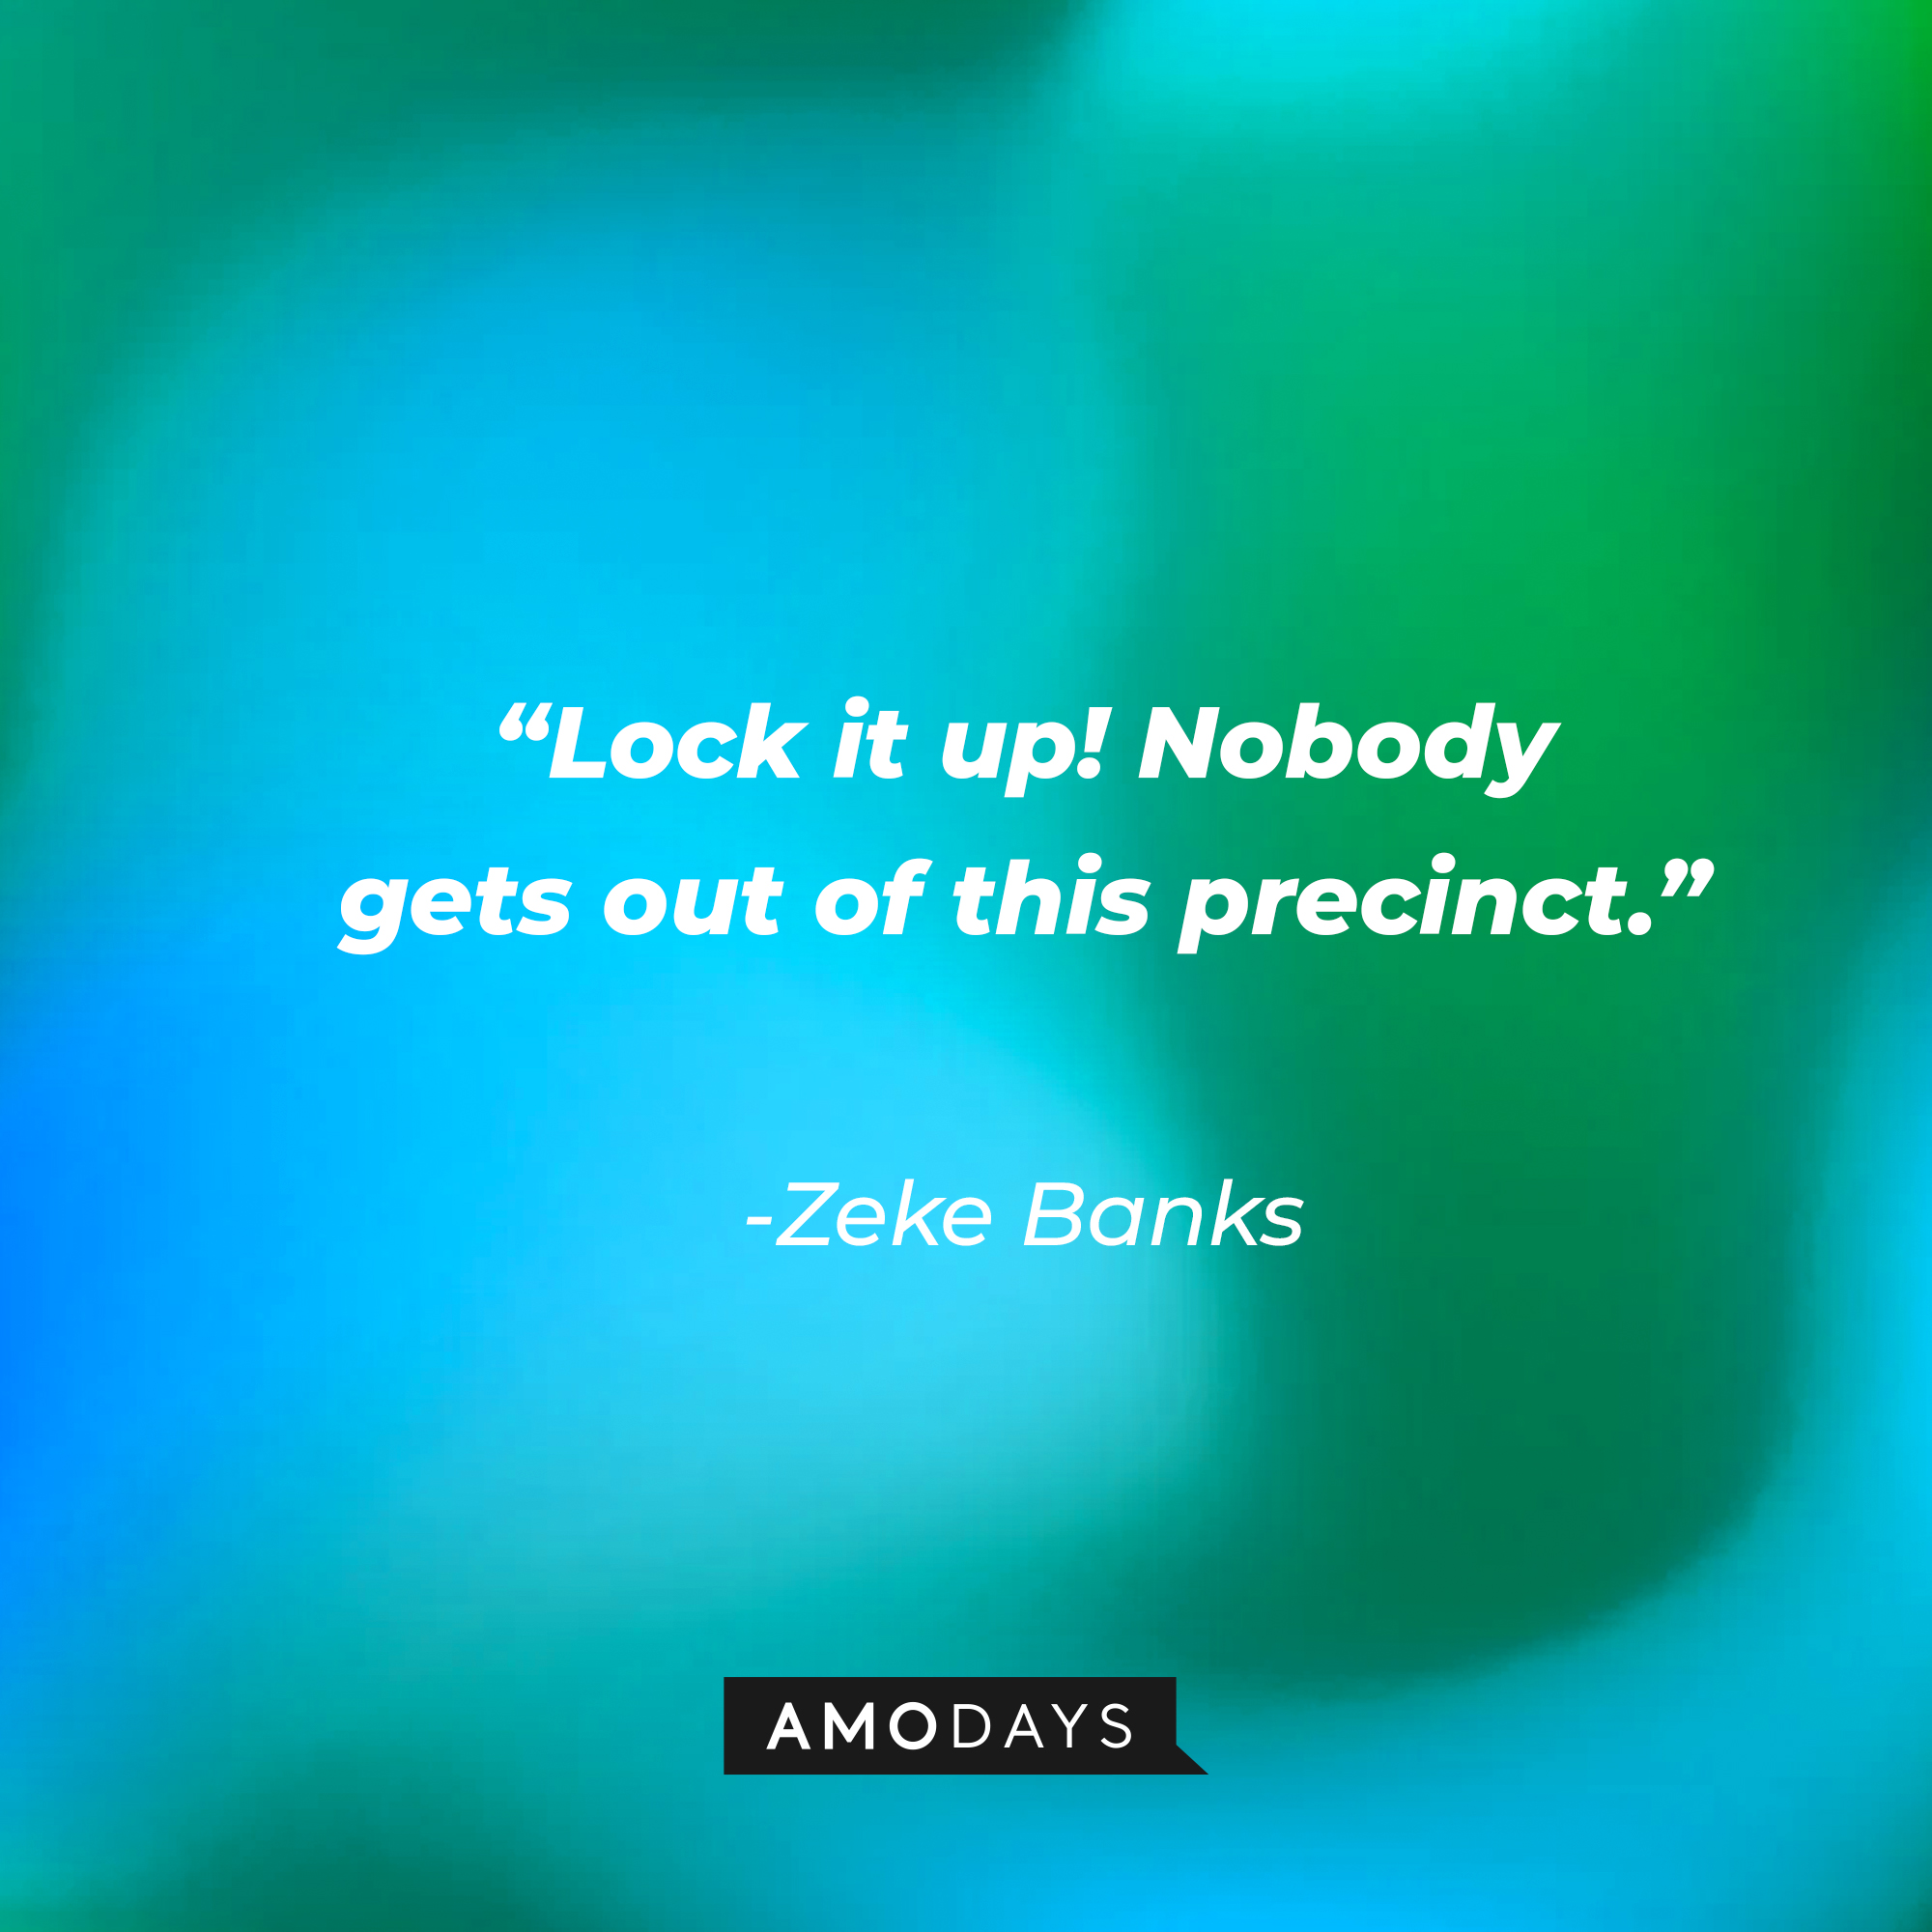 Zeke Banks's quote: "Lock it up! Nobody gets out of this precinct." | Source: Amodays